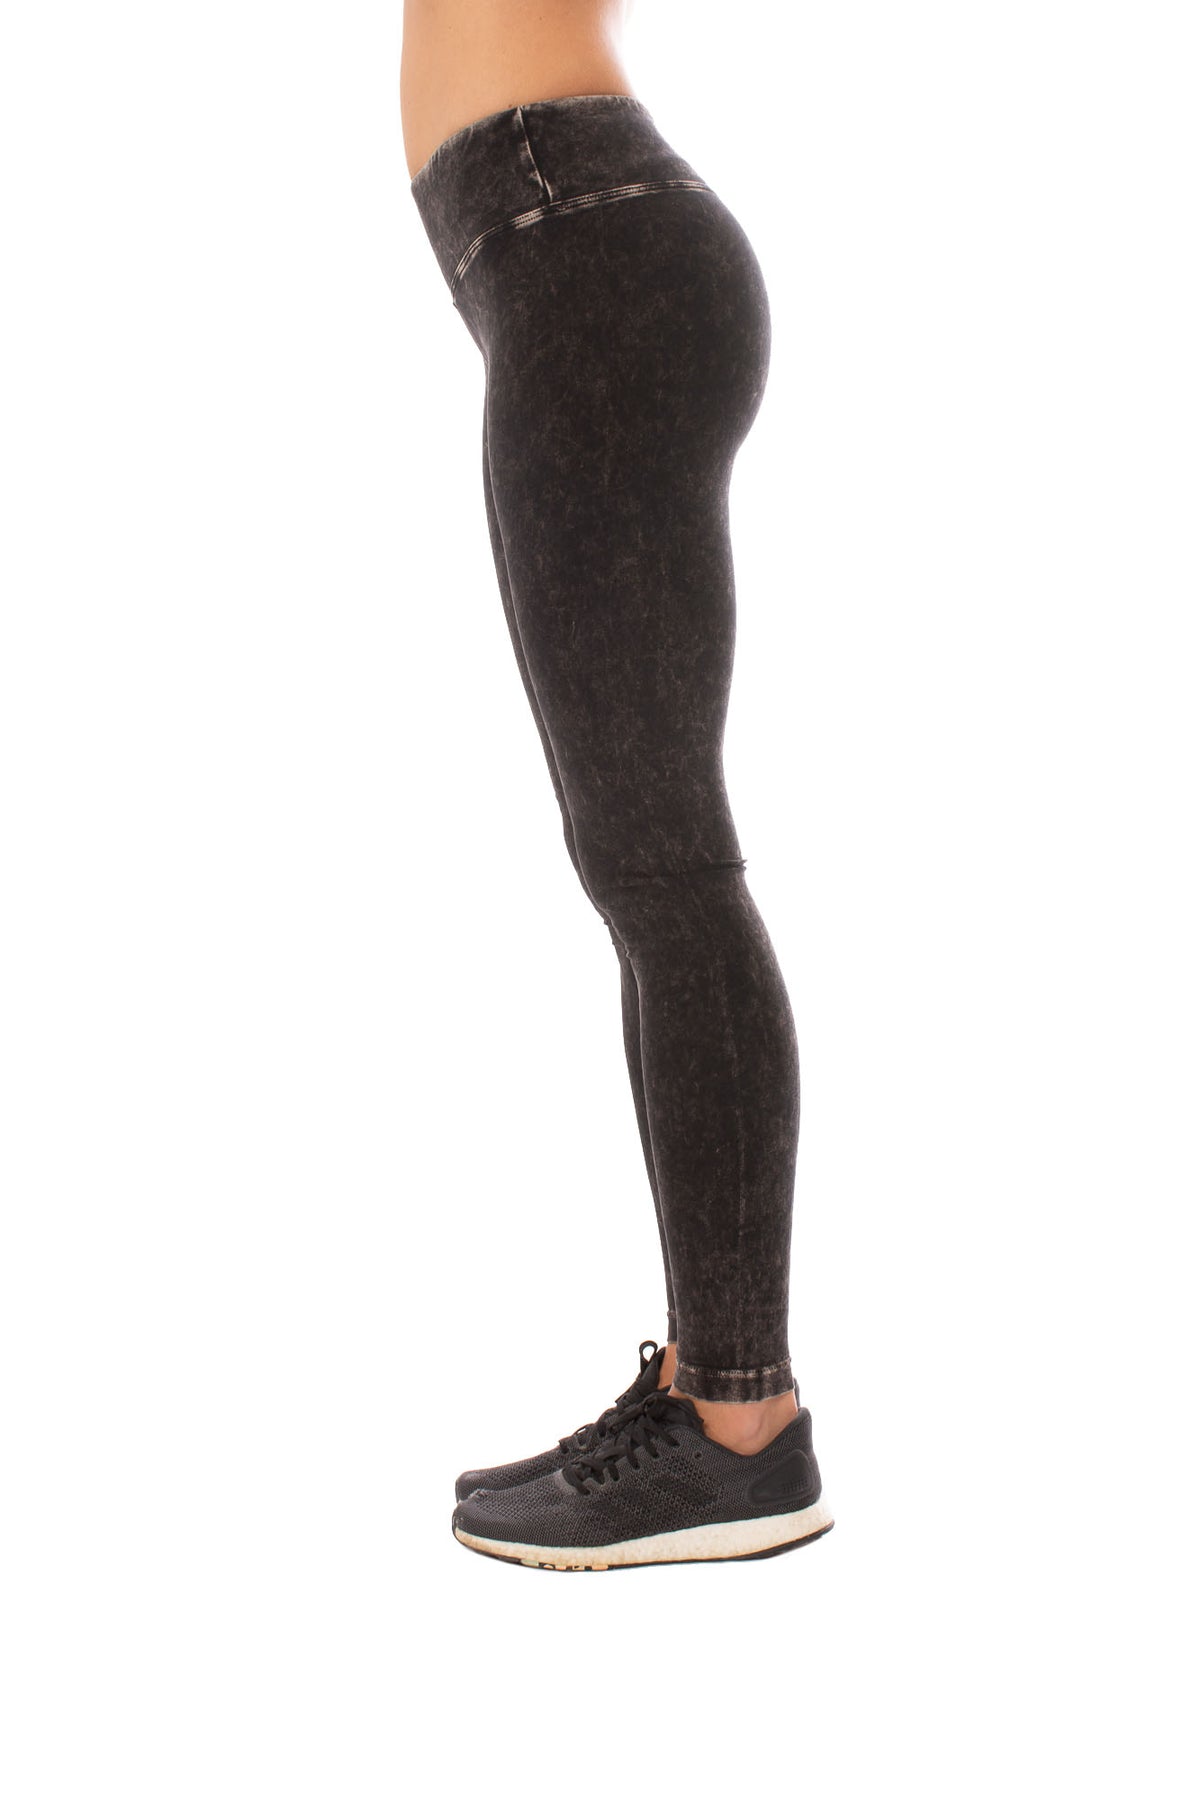 Hard Tail Forever Flat Waist Cage Legging - Dark Charcoal Heather Gray - XS  - 2024 ❤️ CooperativaShop ✓